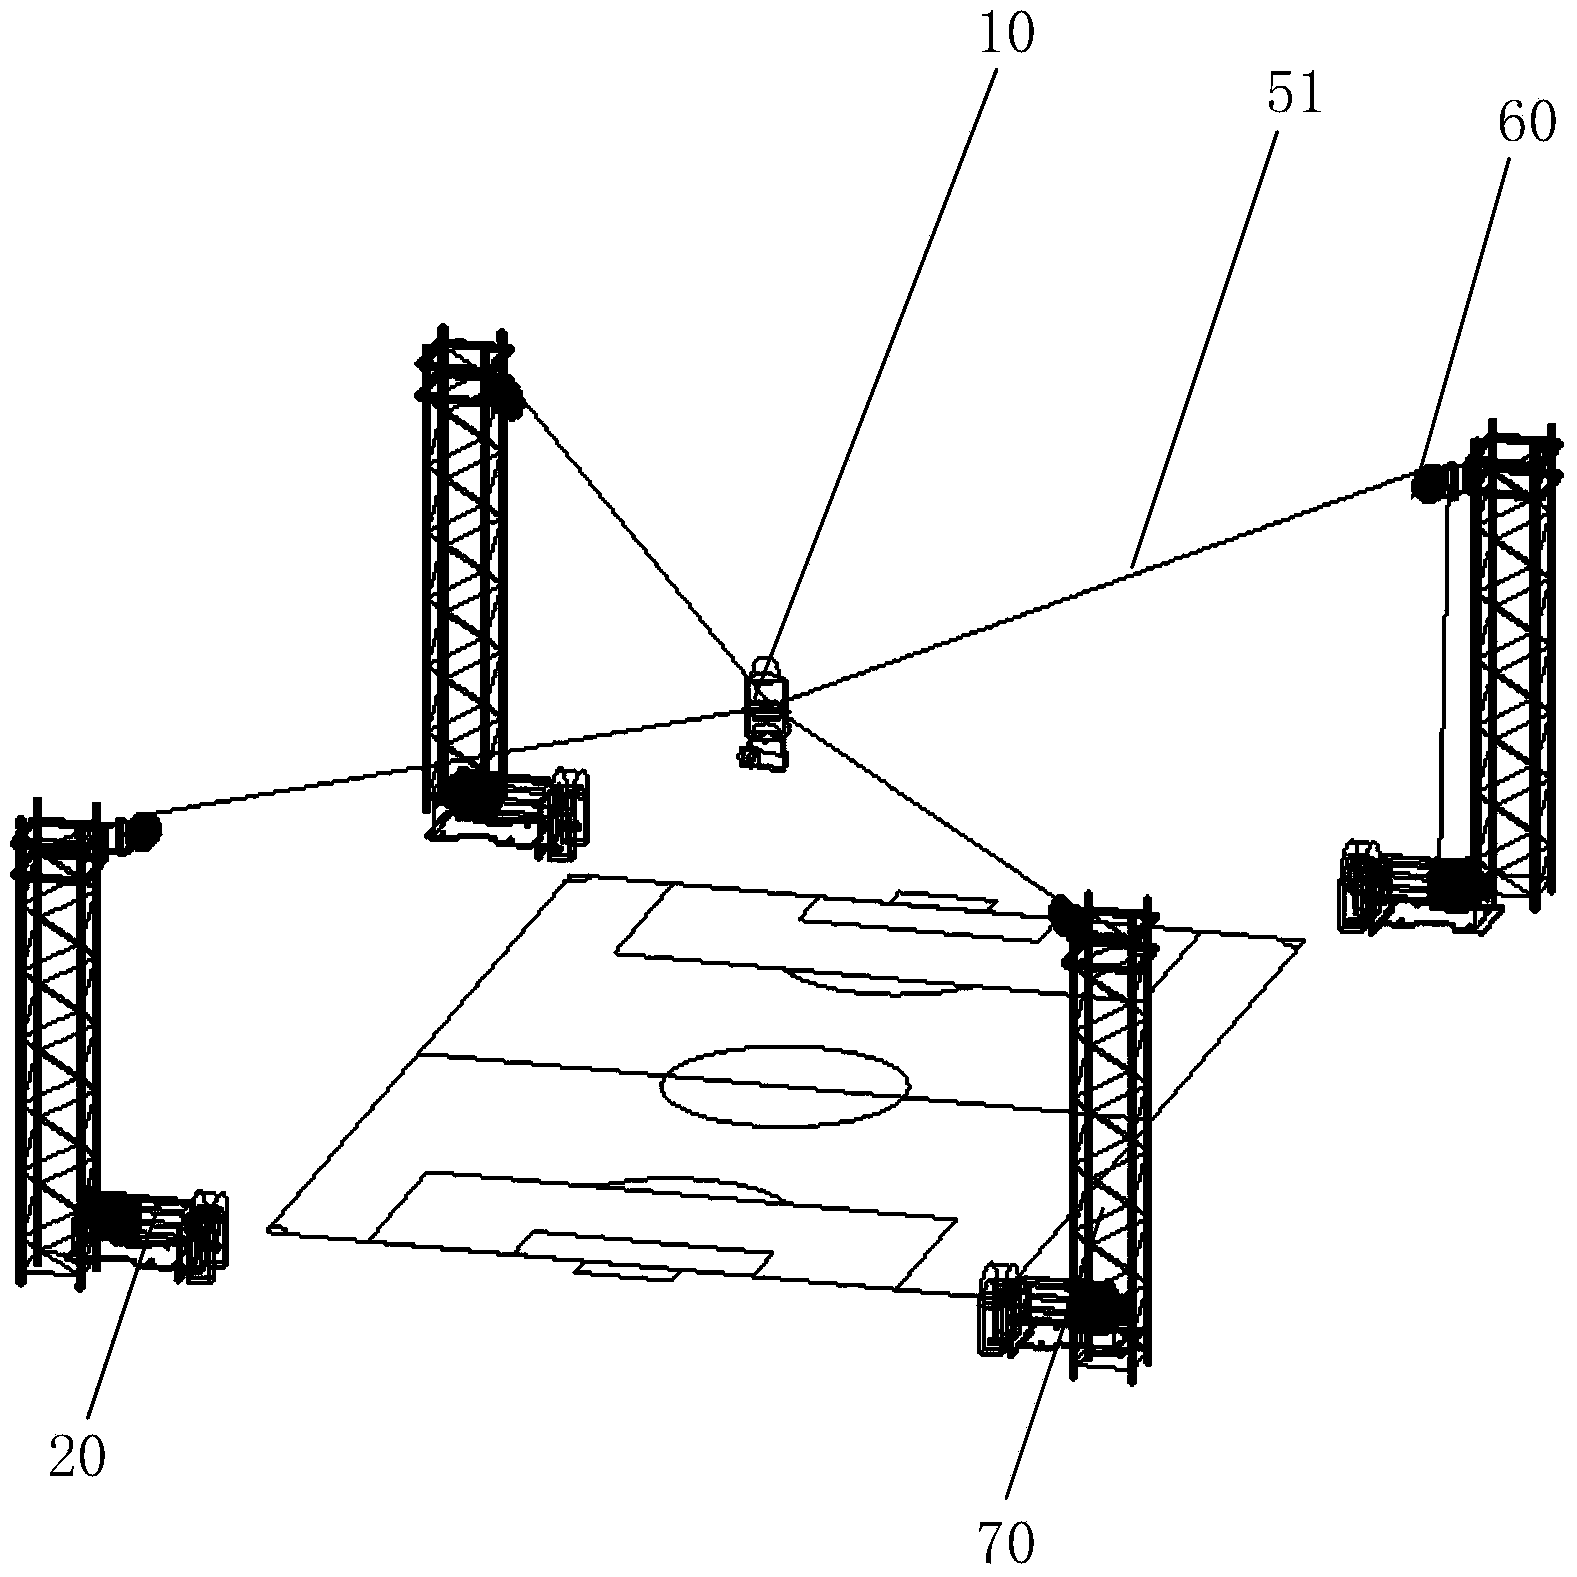 Three-dimension cable shooting platform and three-dimension cable shooting system using the platform